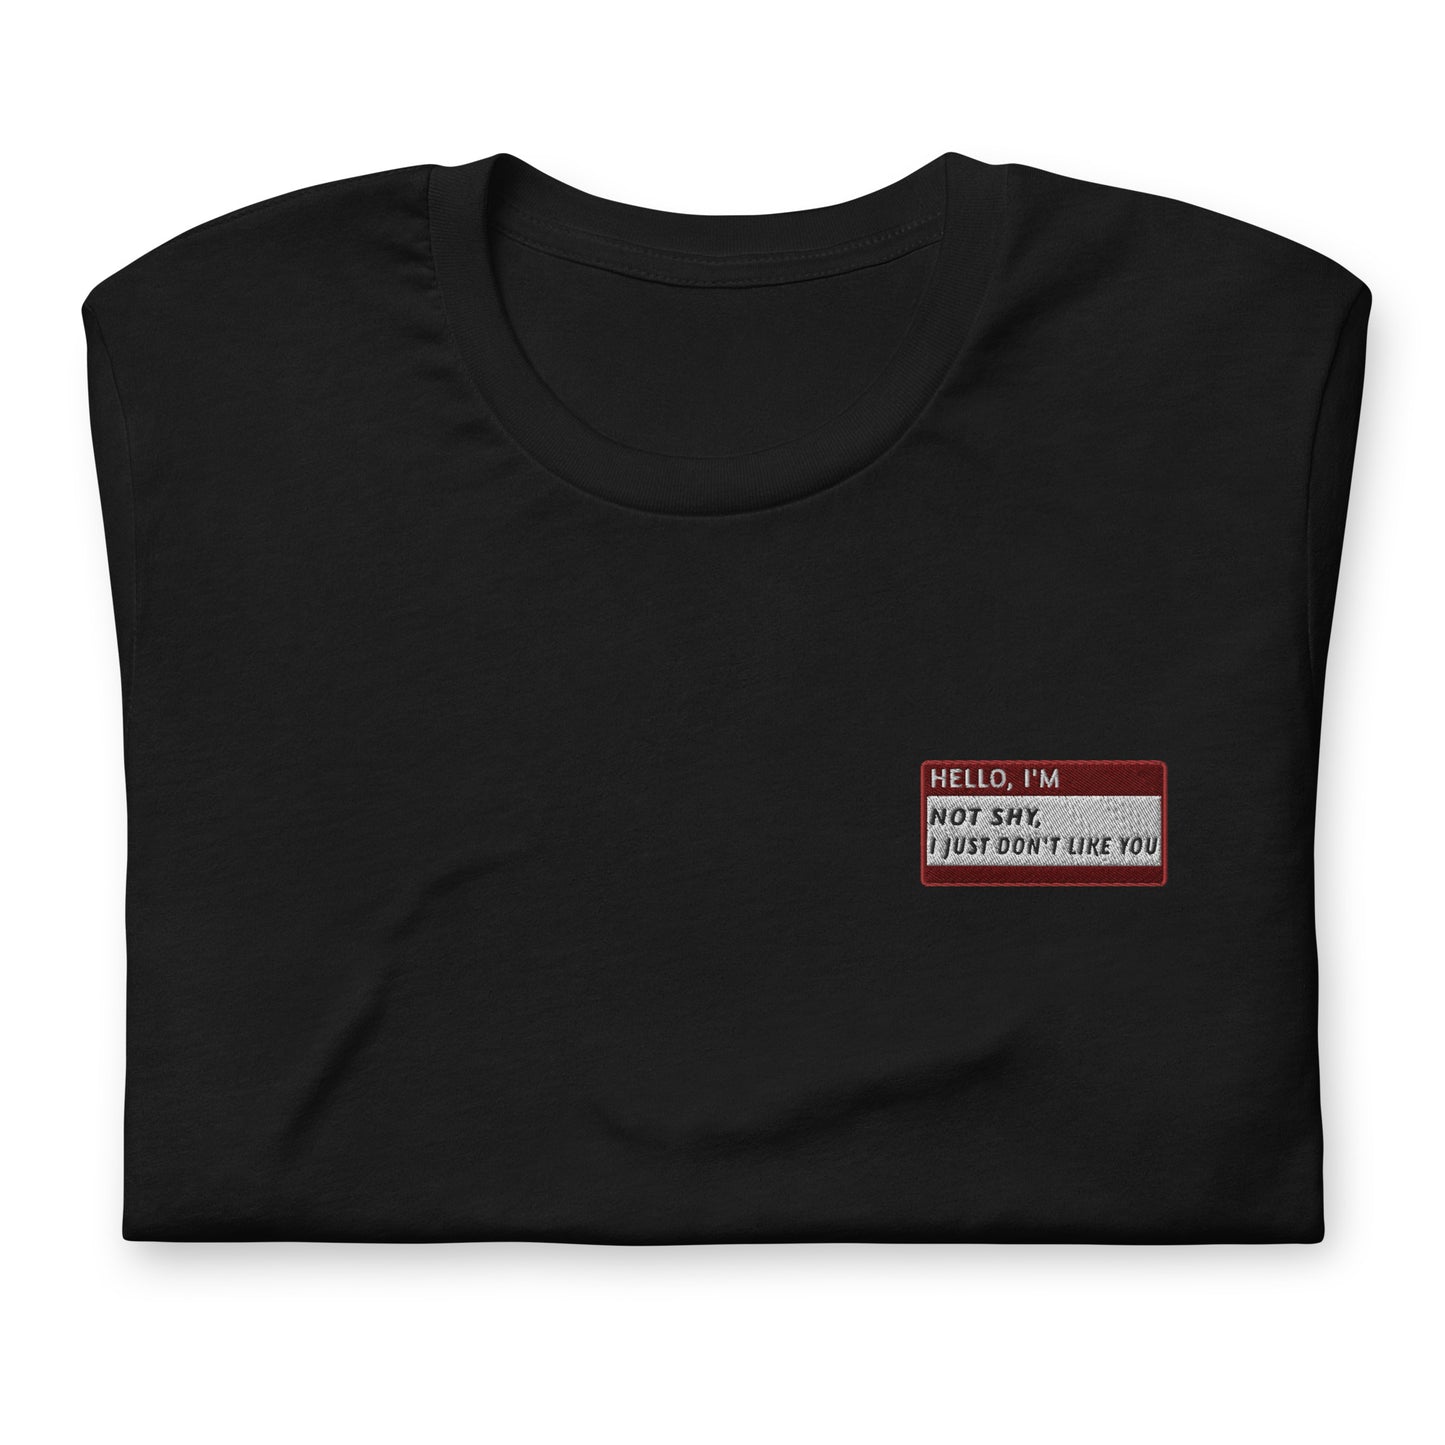 HELLO I'M NOT SHY, I JUST DON'T LIKE YOU - Name Tag T-Shirt